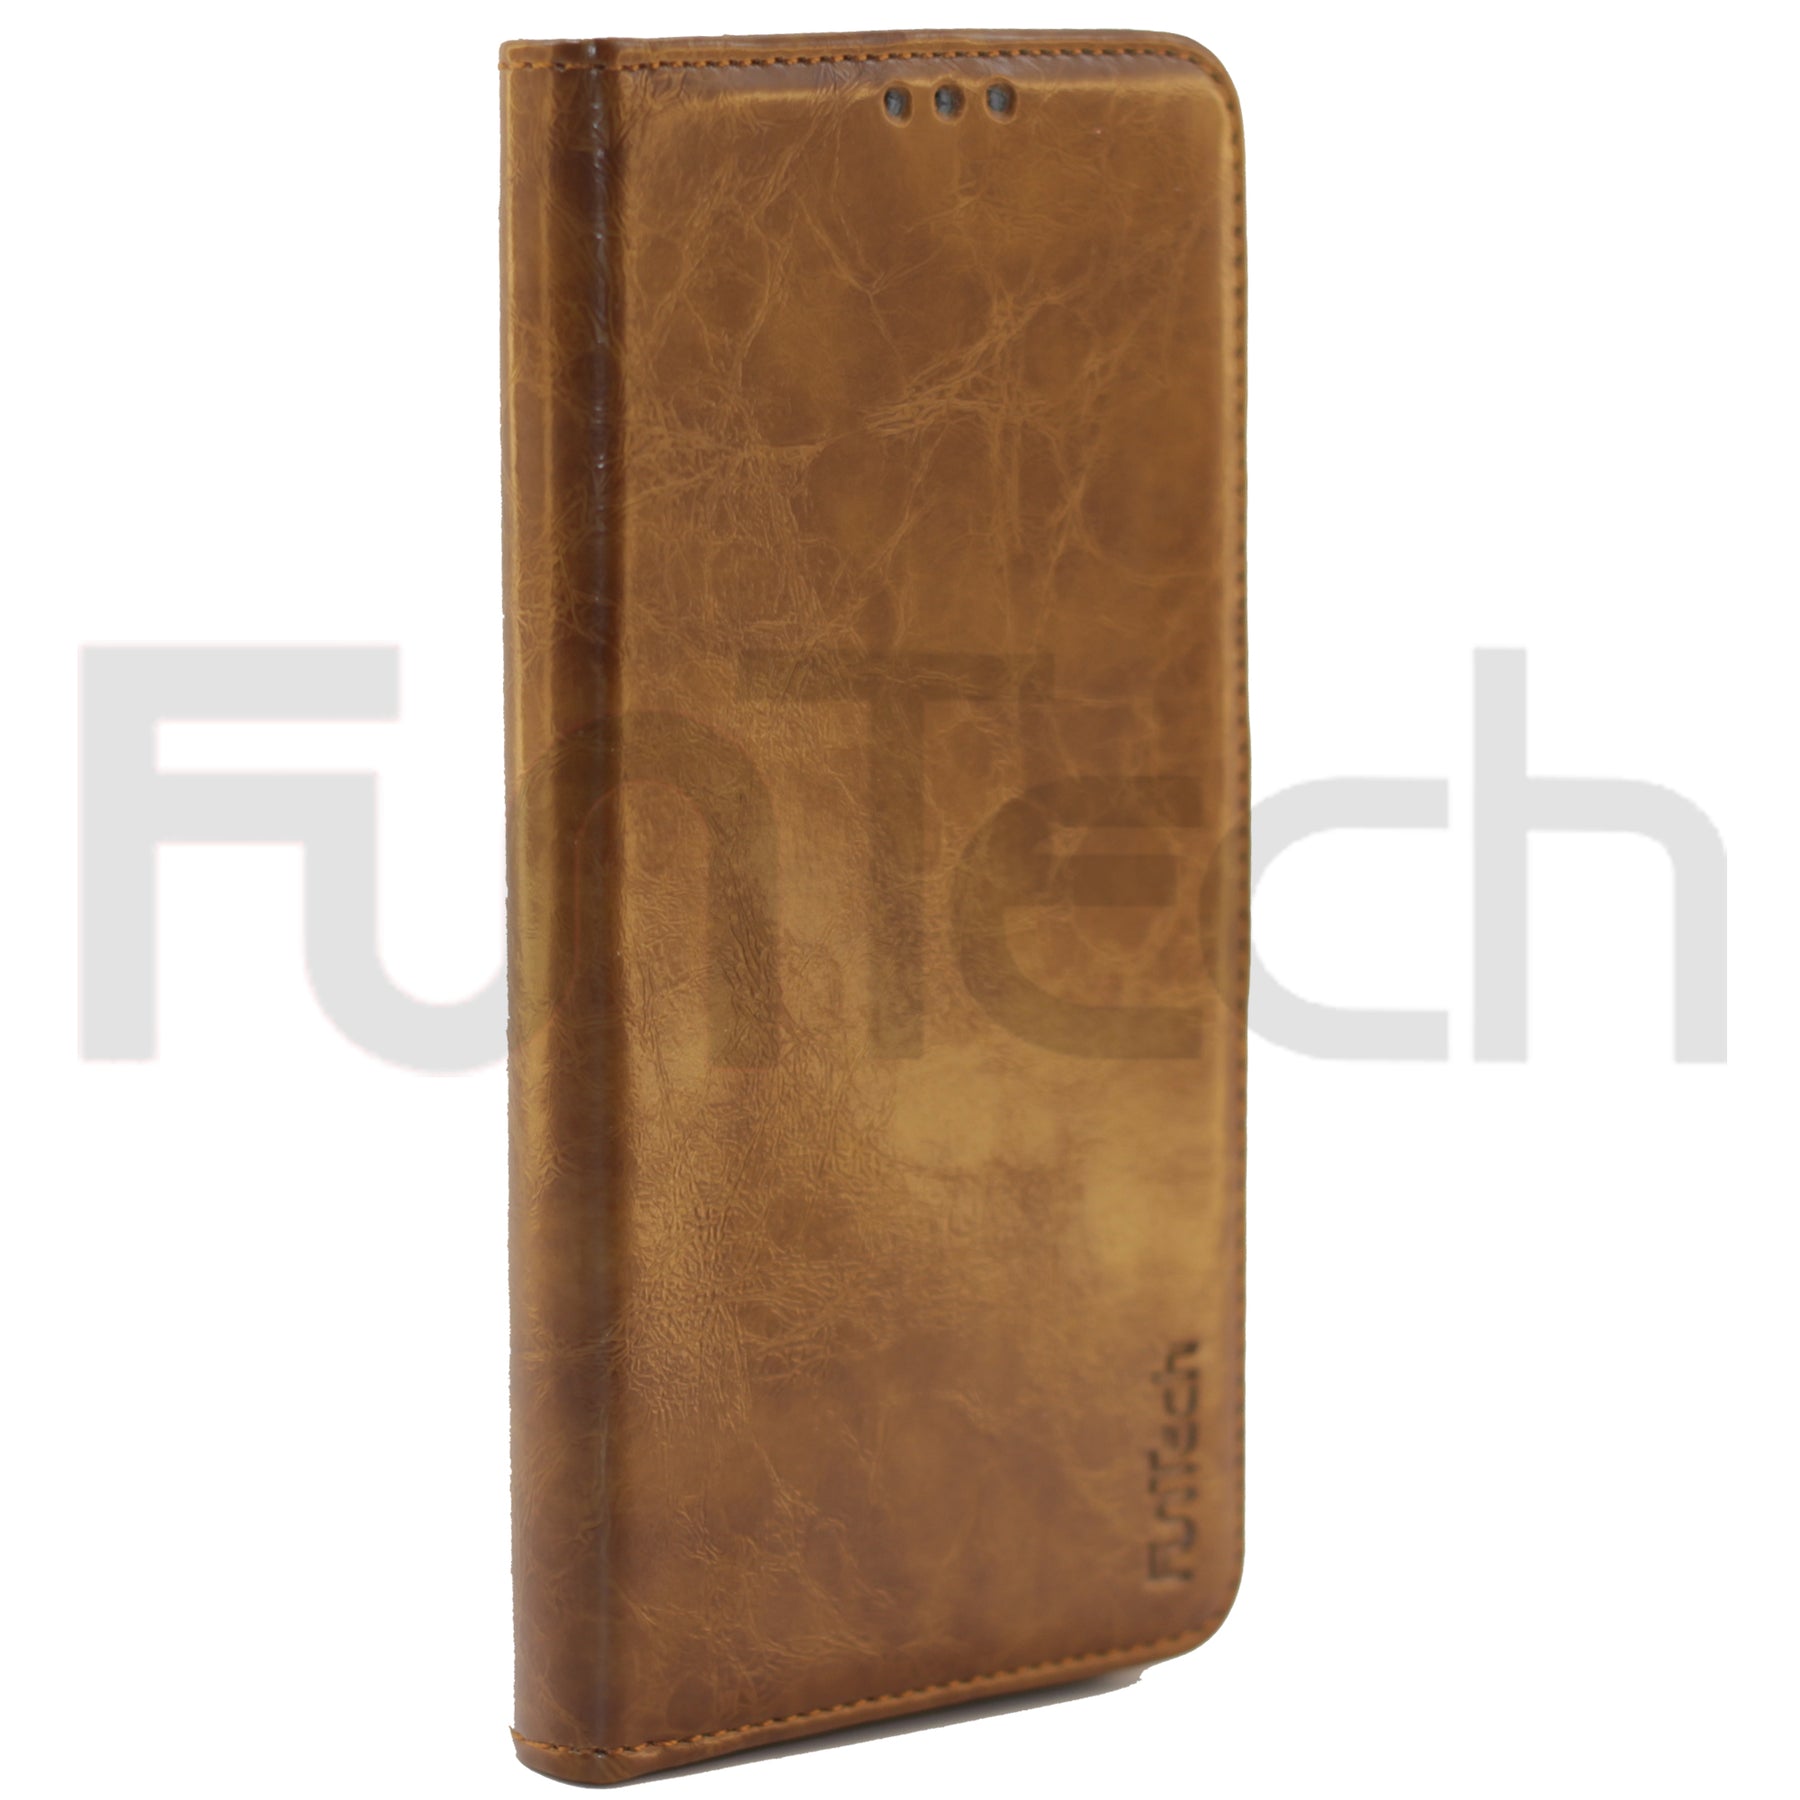 Samsung A8 2018, Leather Wallet Case, Color Brown.